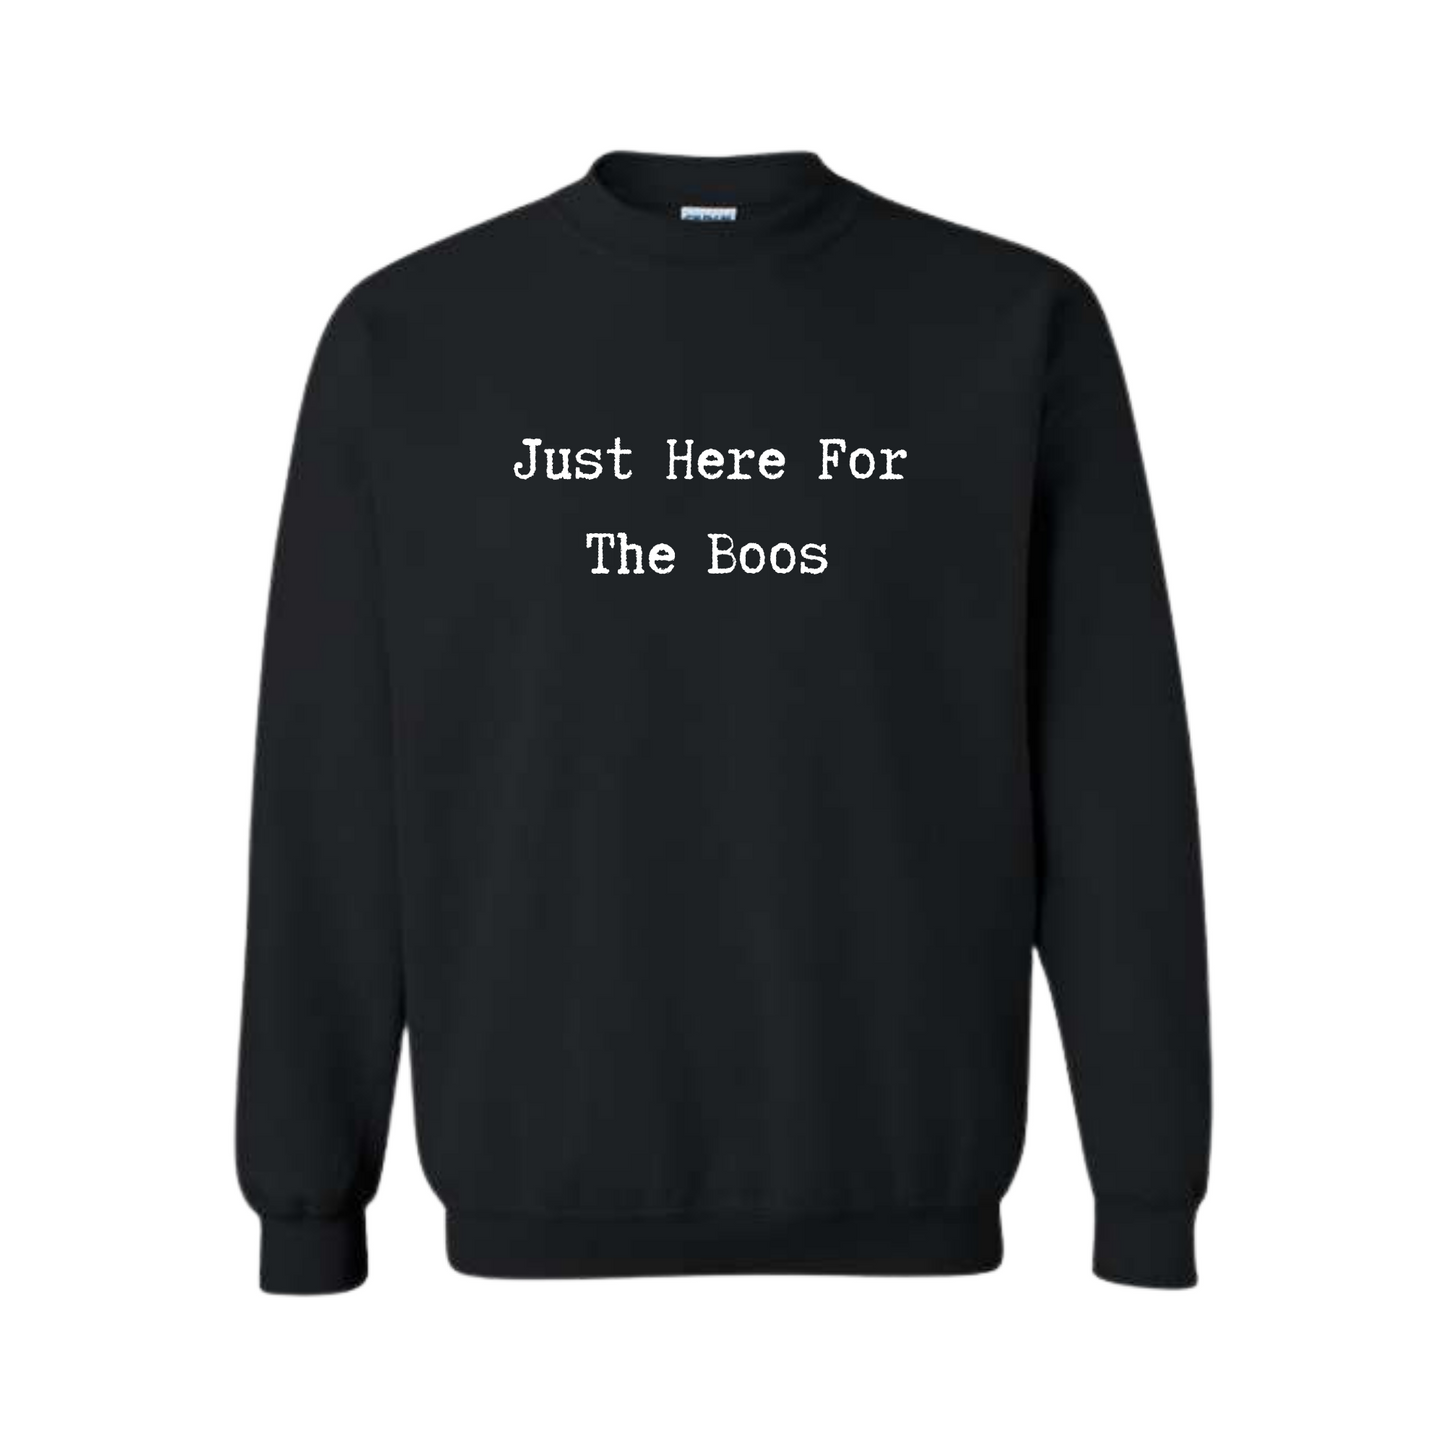 Just Here For The Boos Crewneck